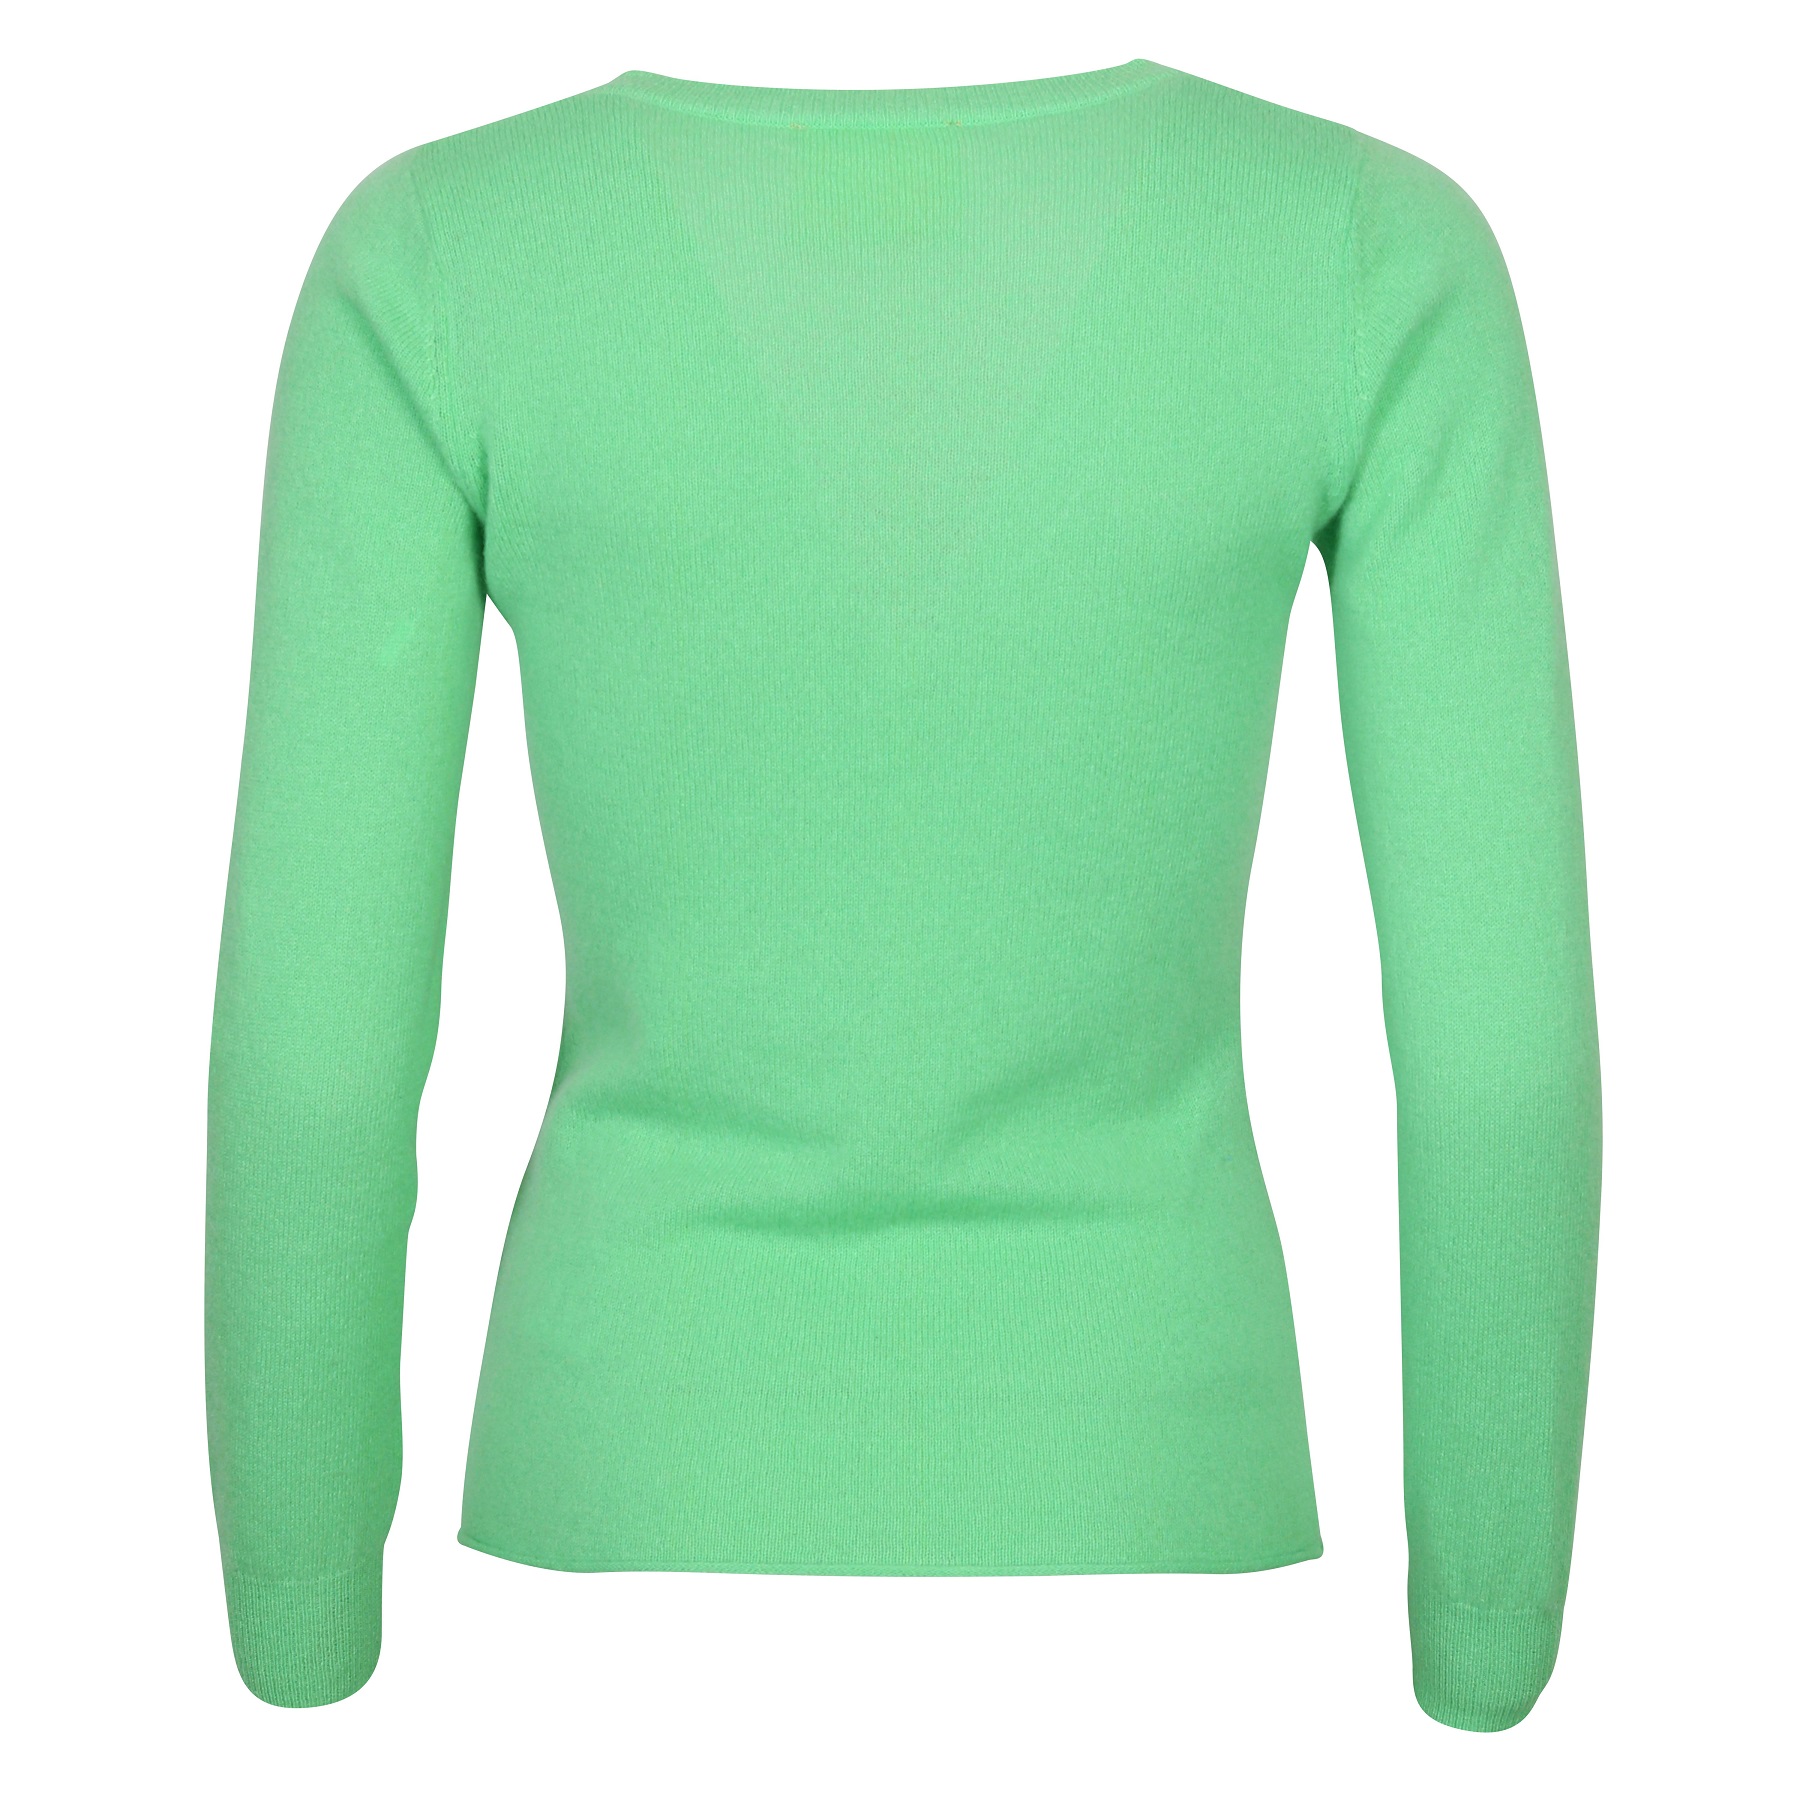 Absolut Cashmere Fitted V-Pullover in Light Green S